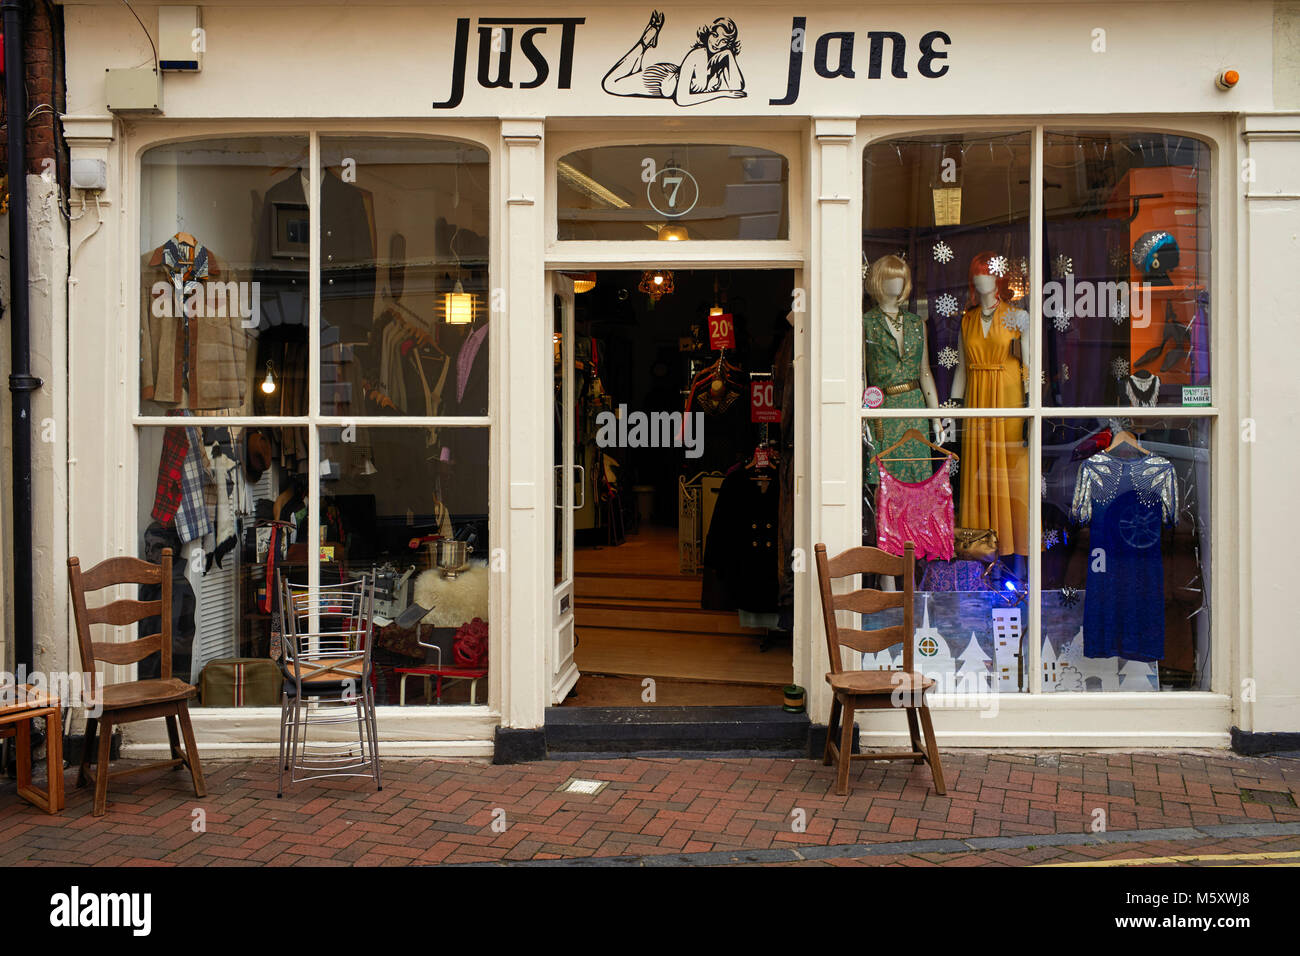 Just Jane vintage clothing shop in the old quarter of Margate Stock Photo